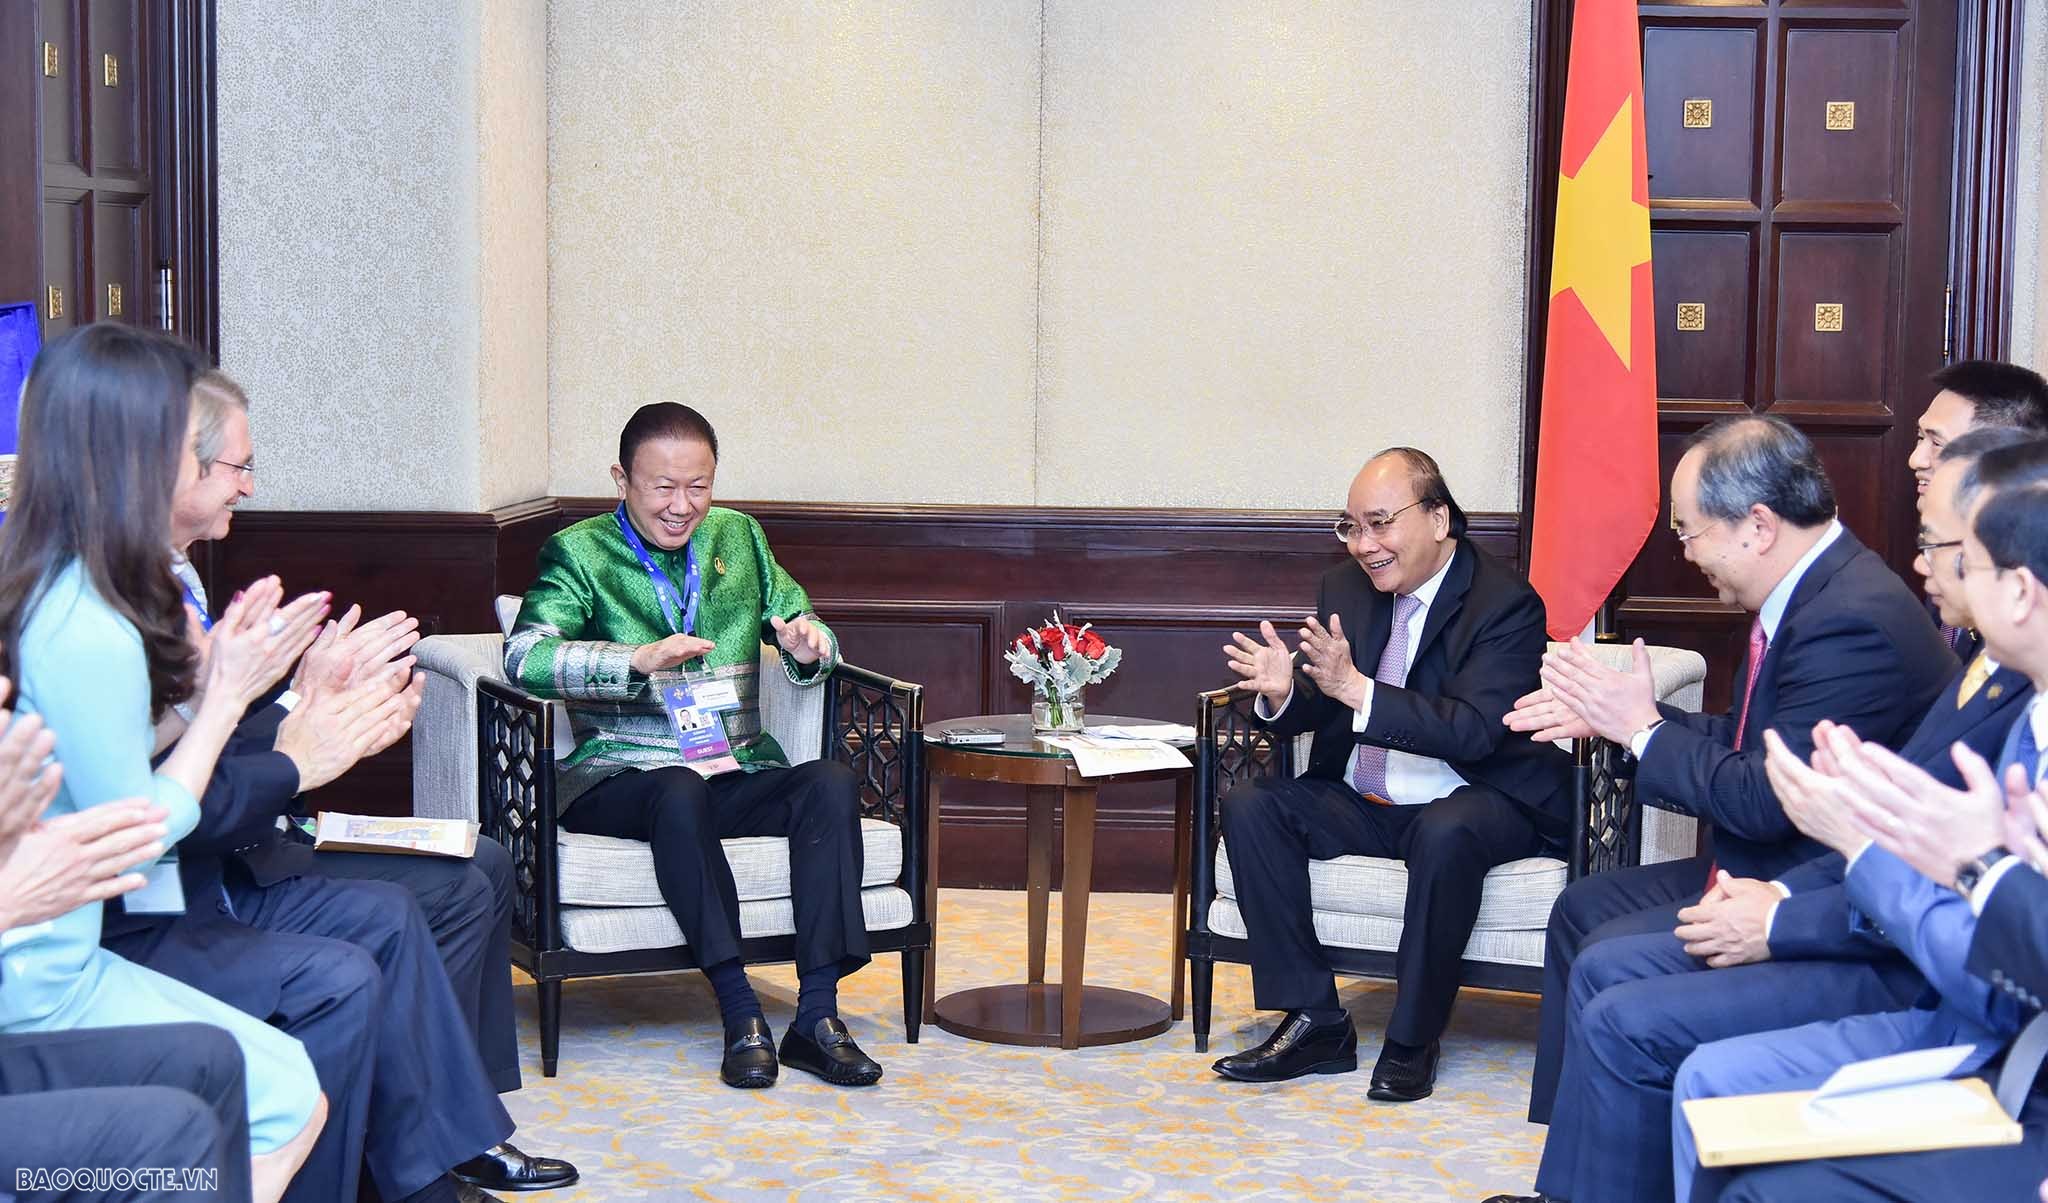 People-to-people exchanges important to Vietnam-Thailand relations: President